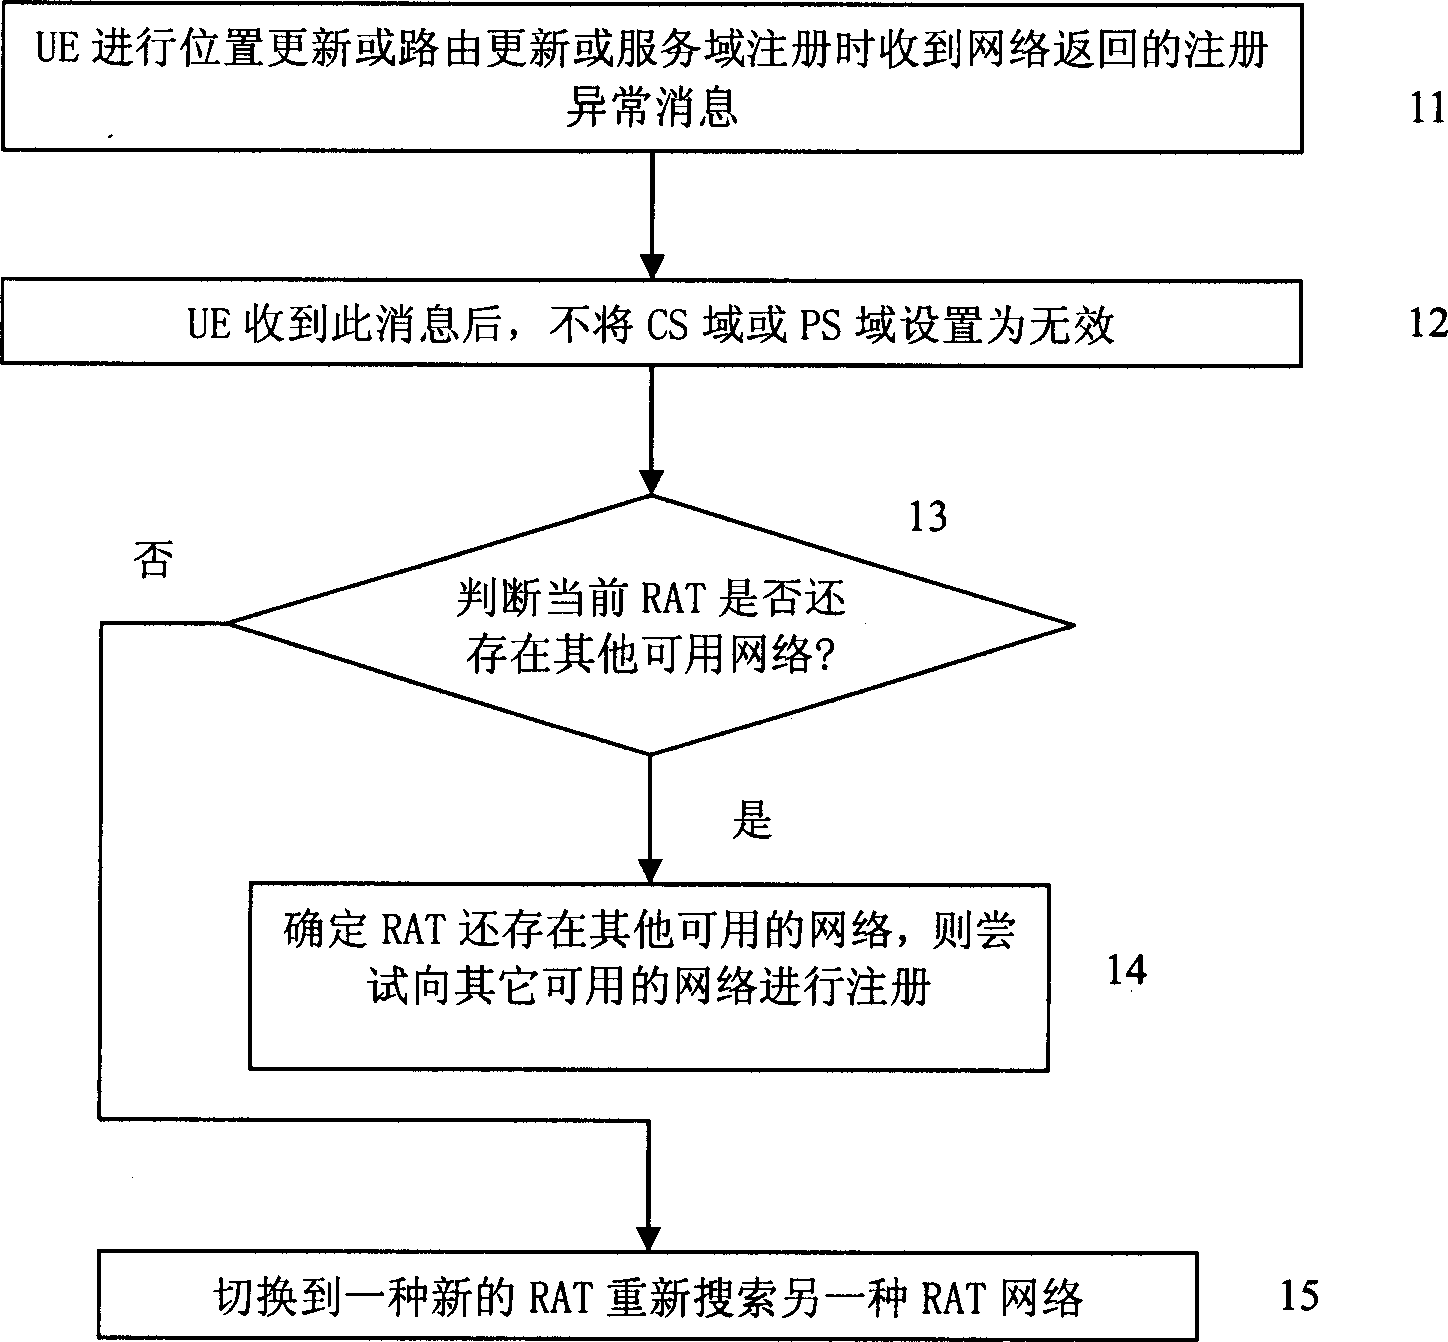 Double-mode derminal network selecting log-on method